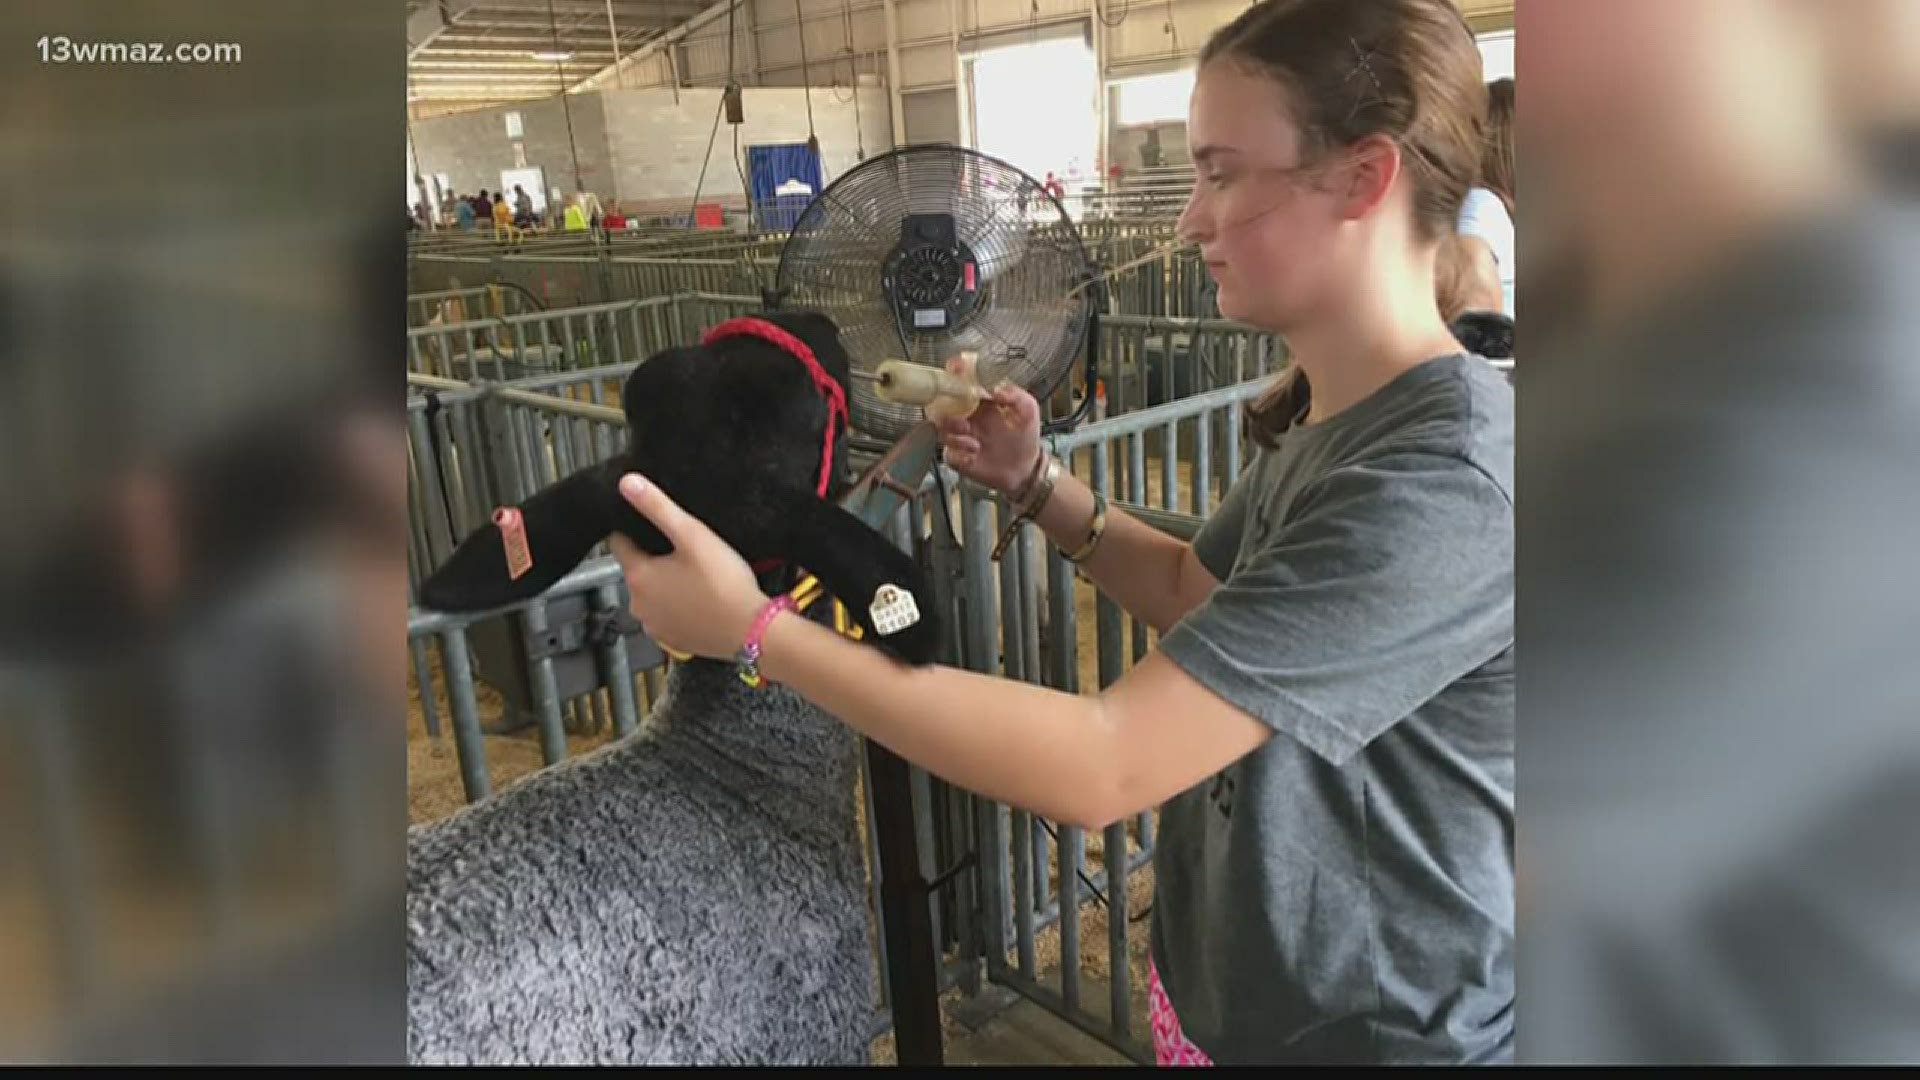 Mary Persons High Agriculture Teacher Bill Waldrep says about 3,000 FFA students across Georgia would have been competing in Macon this week.